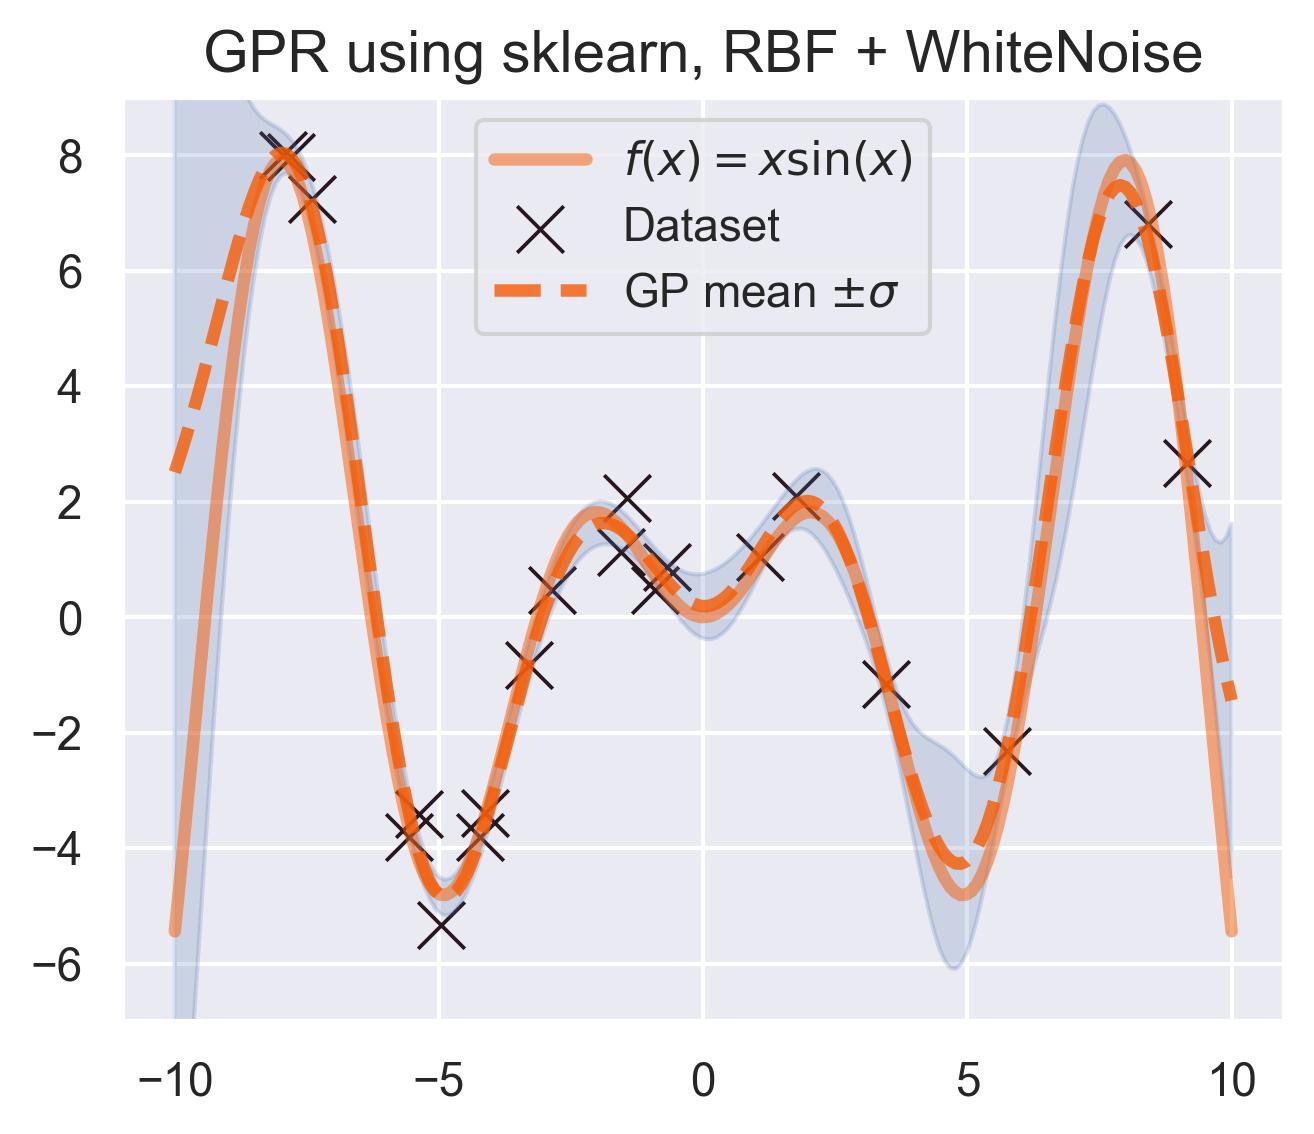 A GP fitted on the noisy evaluations of x * sin(x) using an RBF kernel with diagonal noise, using scikit-learn as the backend.